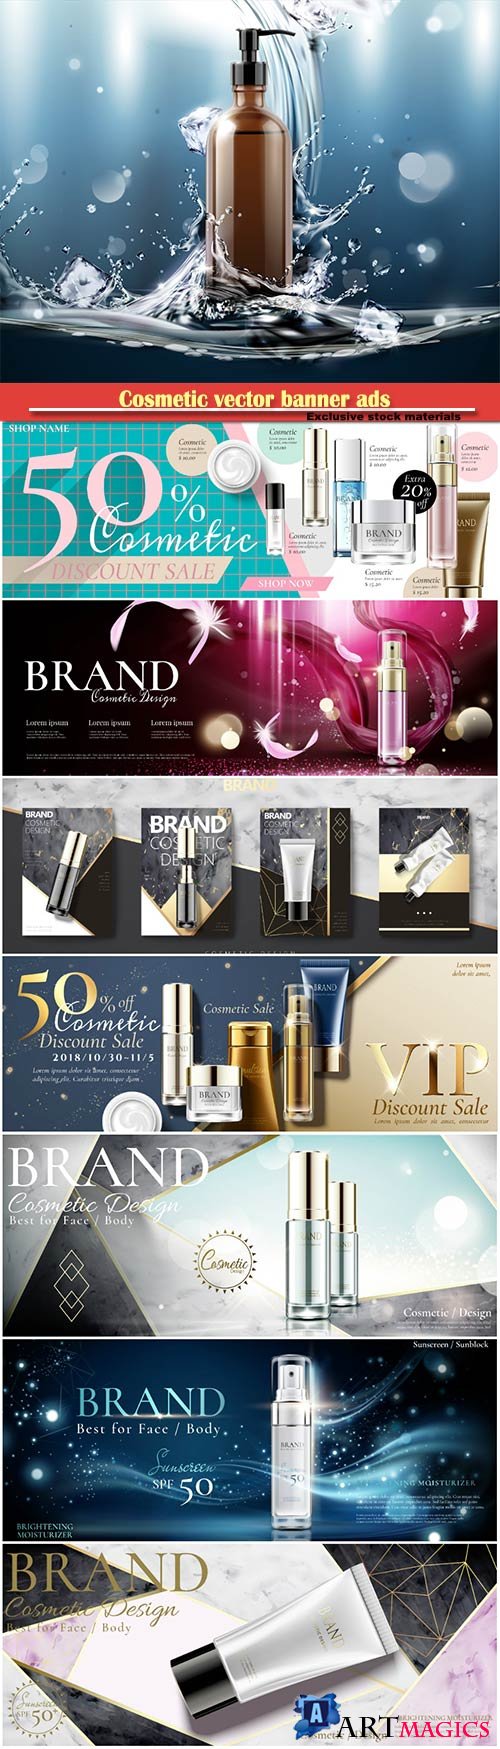 Cosmetic vector banner ads with spray bottle in 3d illustration